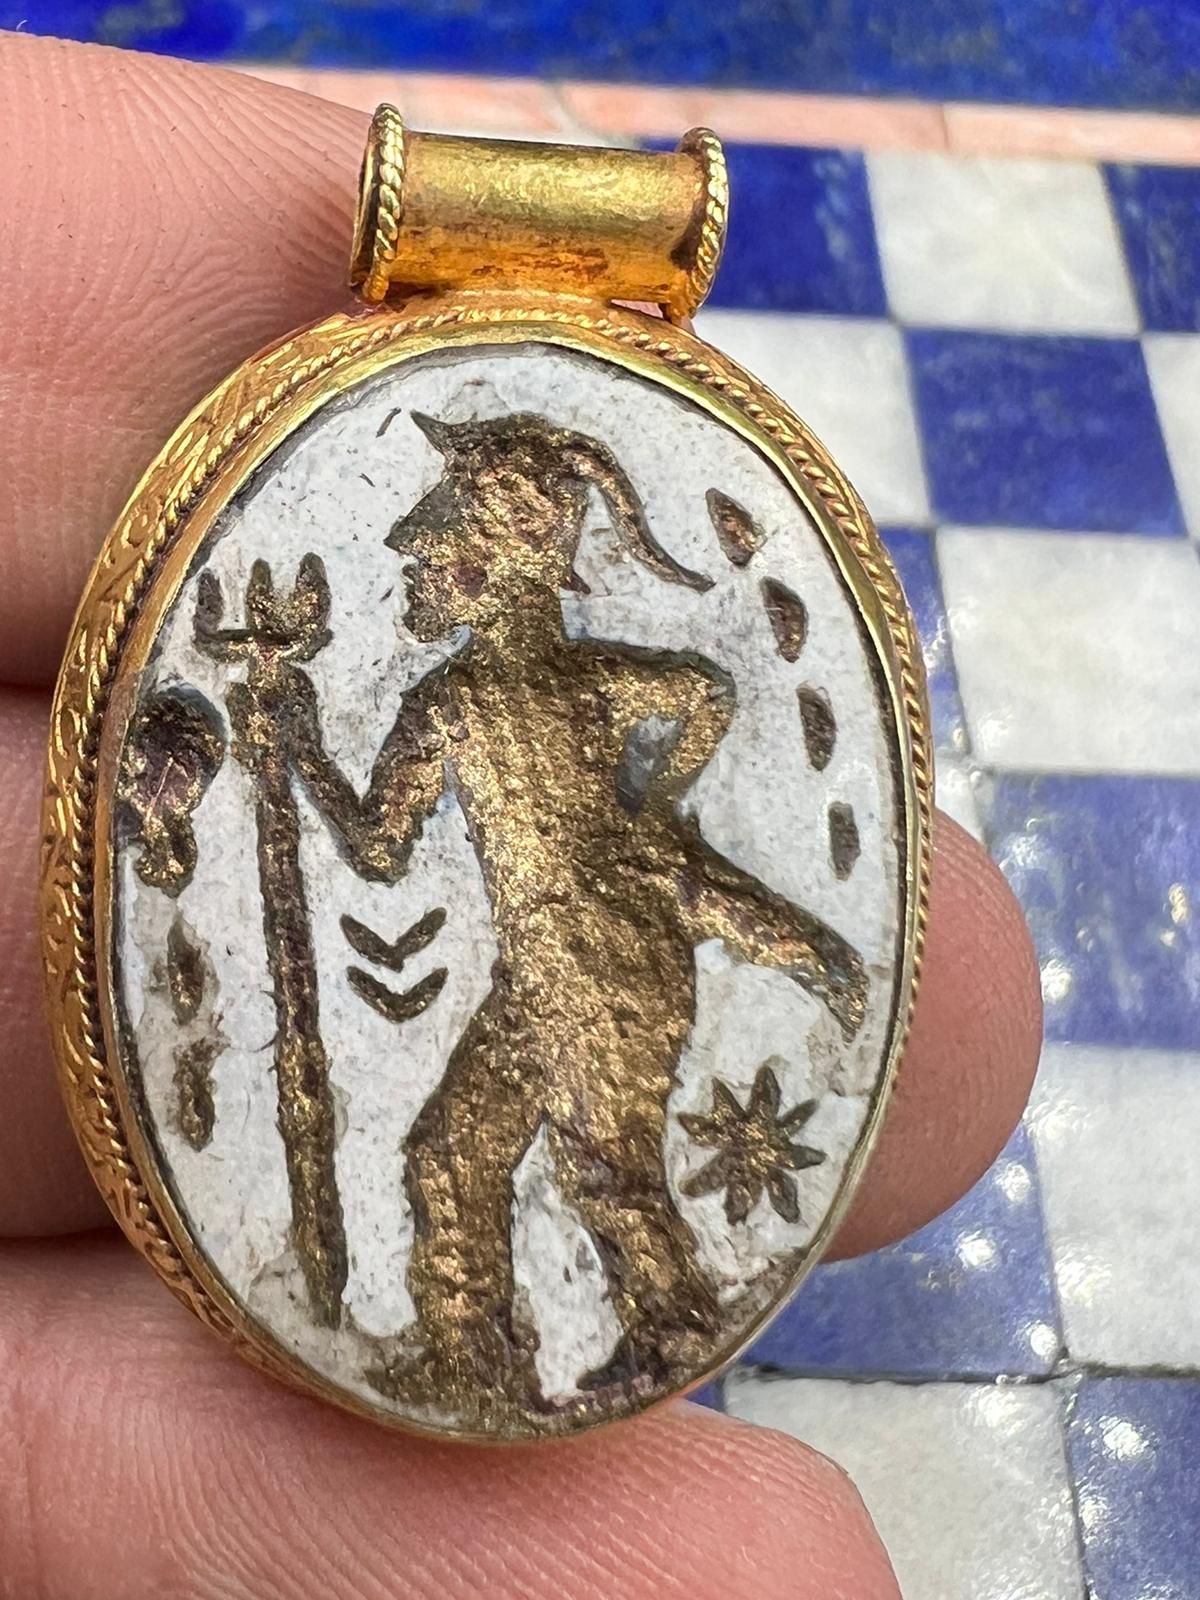 Bochic Curated “Alexander Mocdon” Antique Cameo, Afghanistan 18k Gold & Agate 

Bochic Curated Antique Cameo From Afghanistan 
18k Solid Gold & Antique Agate 

This is the kind of Cameo you see in a Museum
329 BC Alexander crosses the Hindu Kush.